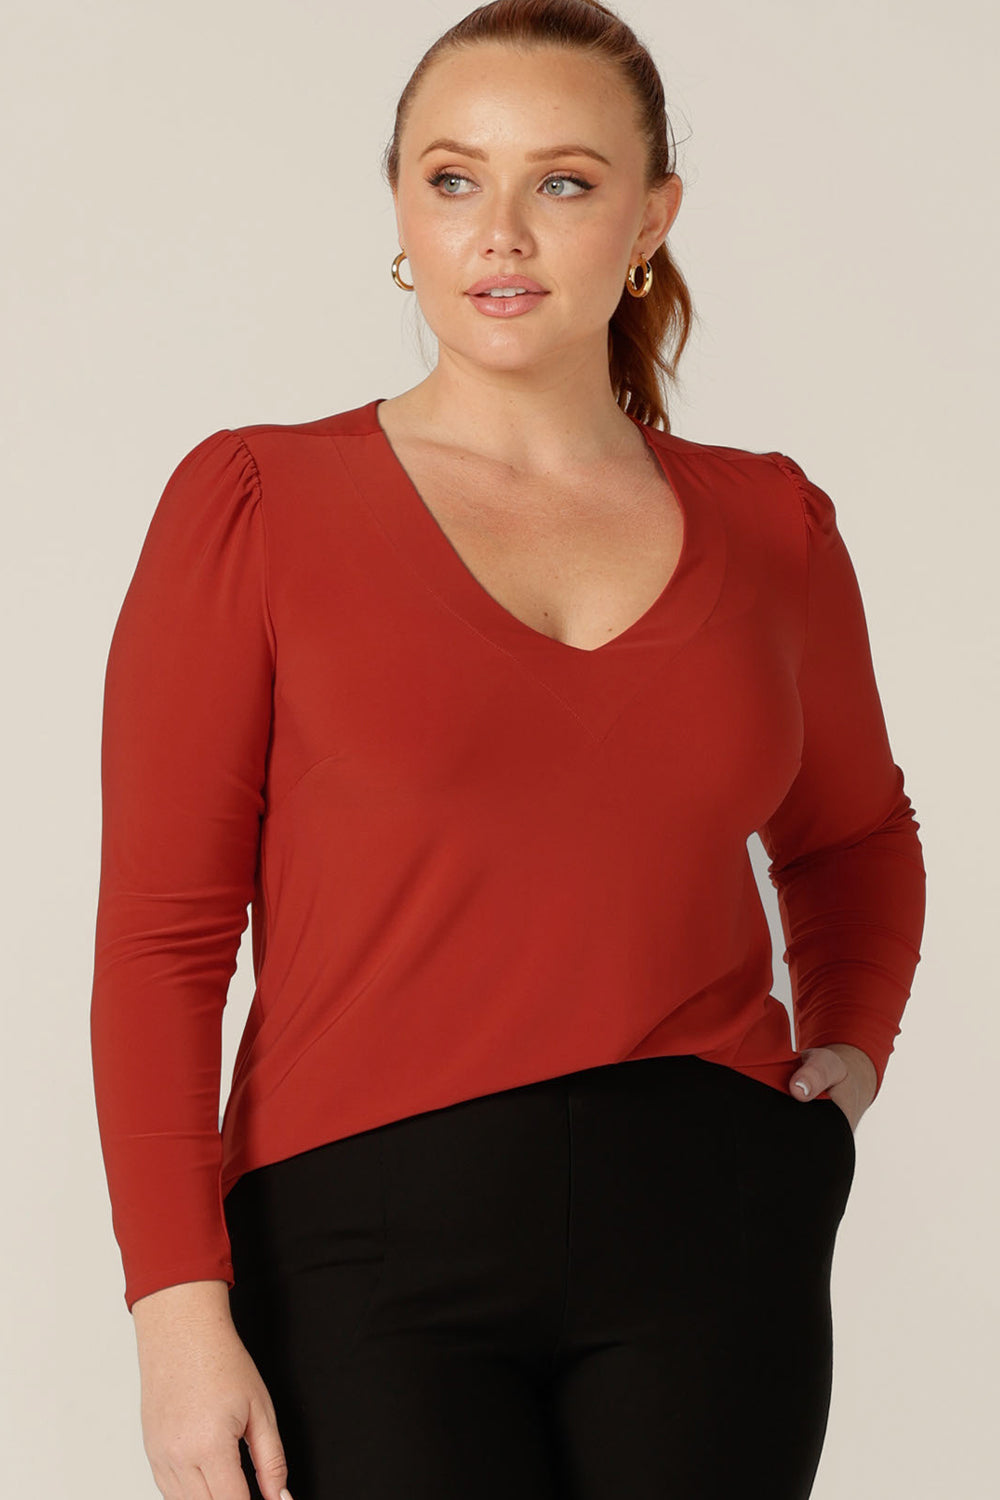 Good work tops for petite to fuller figure women, L&F's great range of women's tops includes this V-neck jersey top with long sleeves. In orange dry-touch jersey, this comfortable top is good for revitalising workwear suits and pants.